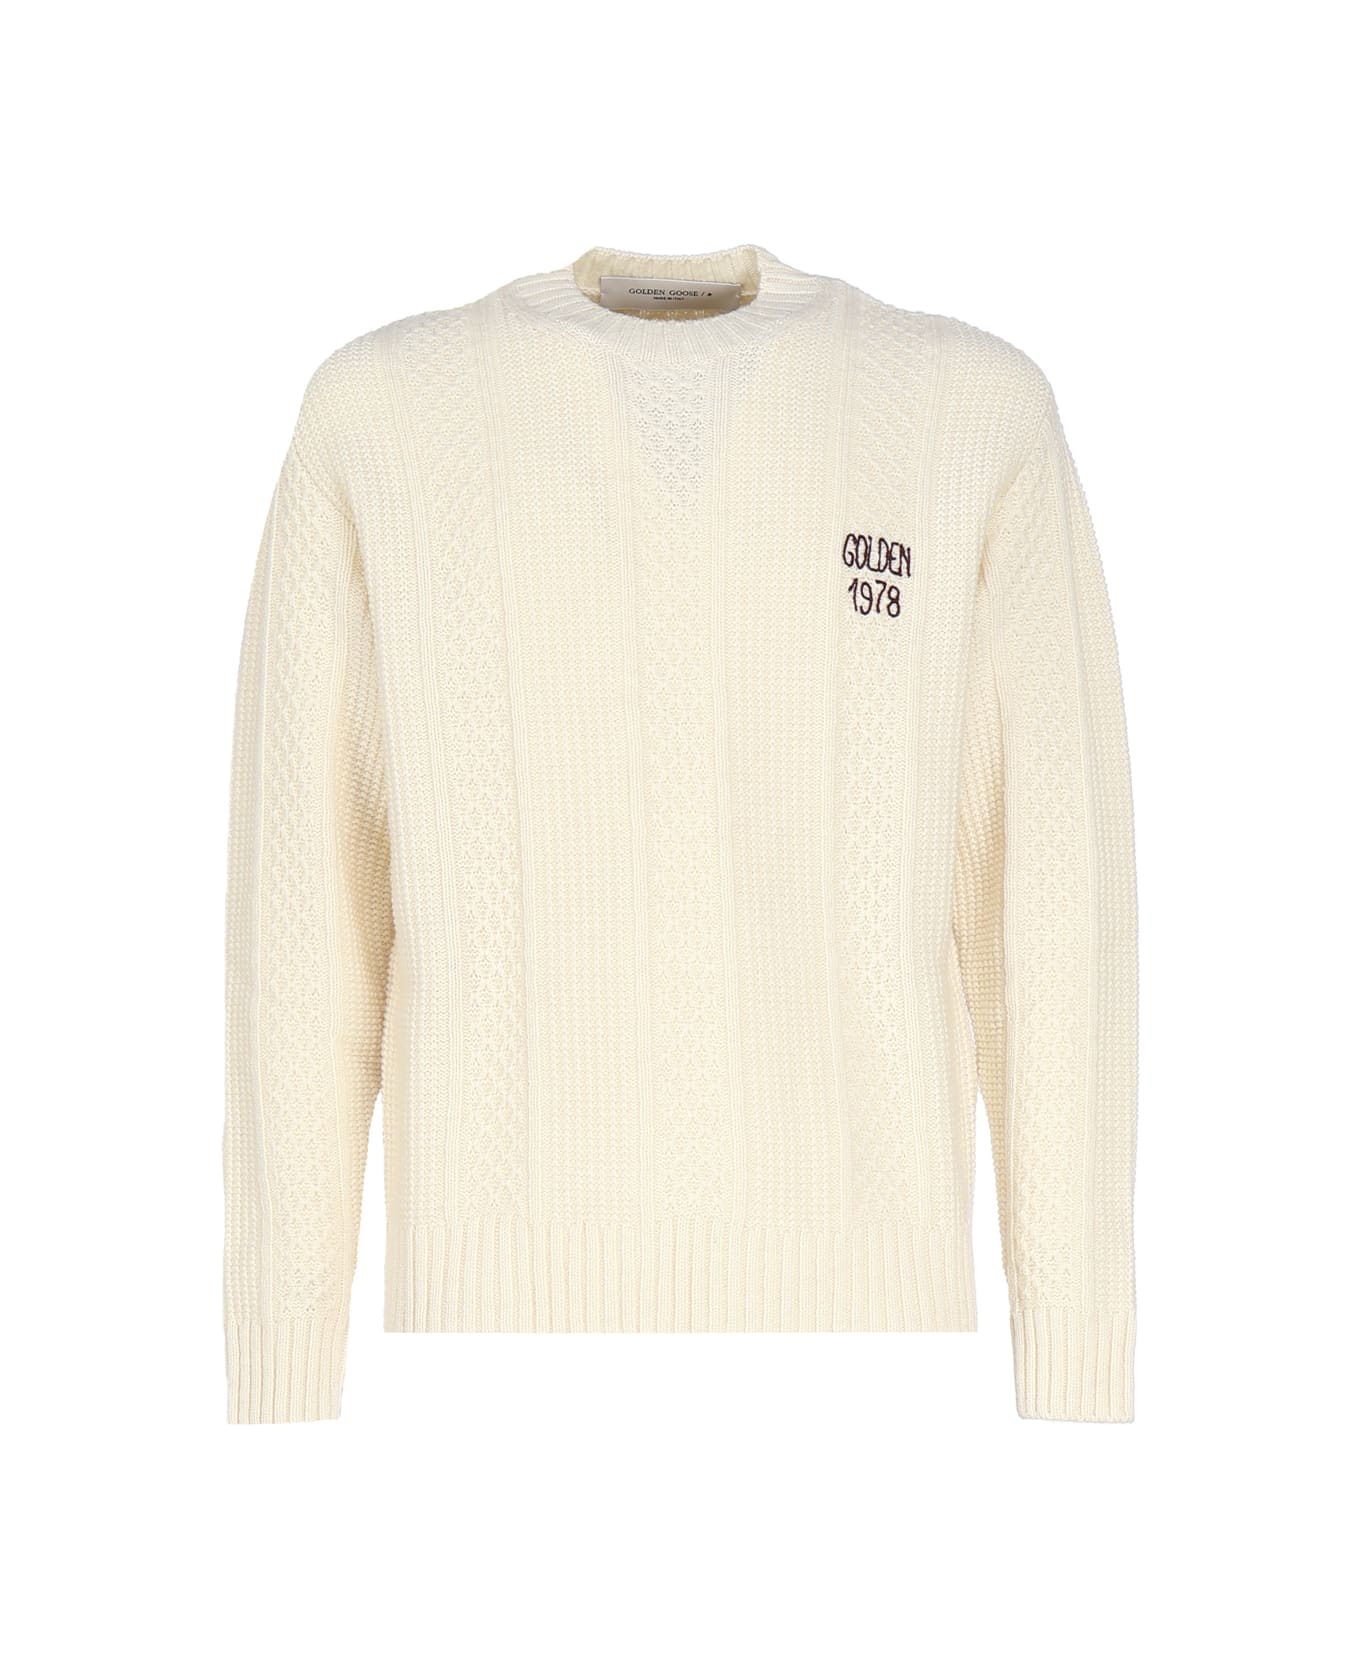 Golden Goose Wool Sweater With Embroidery - White